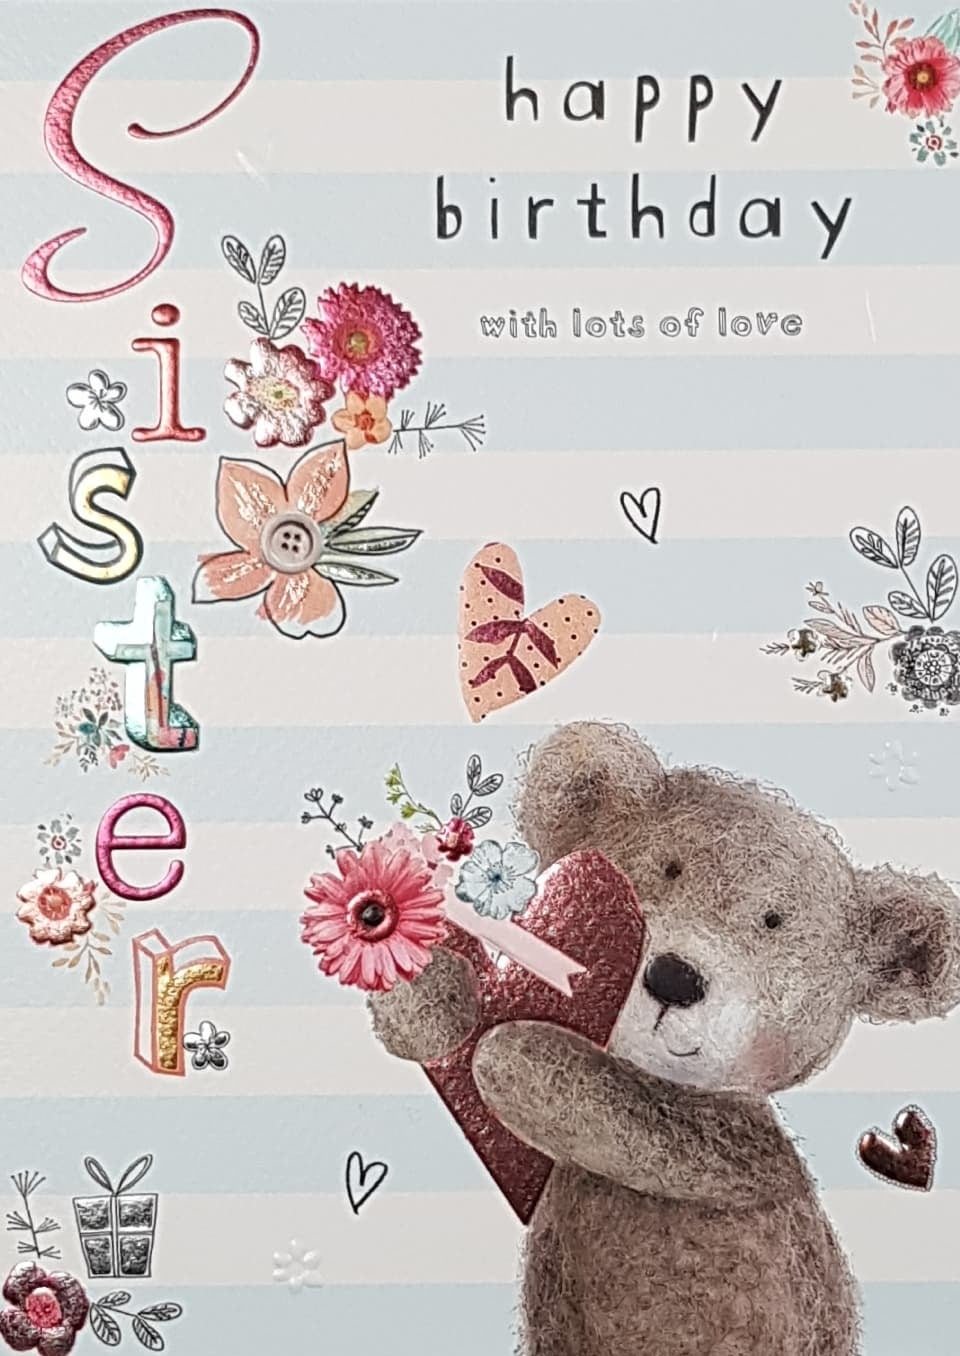 Birthday Card - Sister / A Smiling Teddy & A Floral Motive